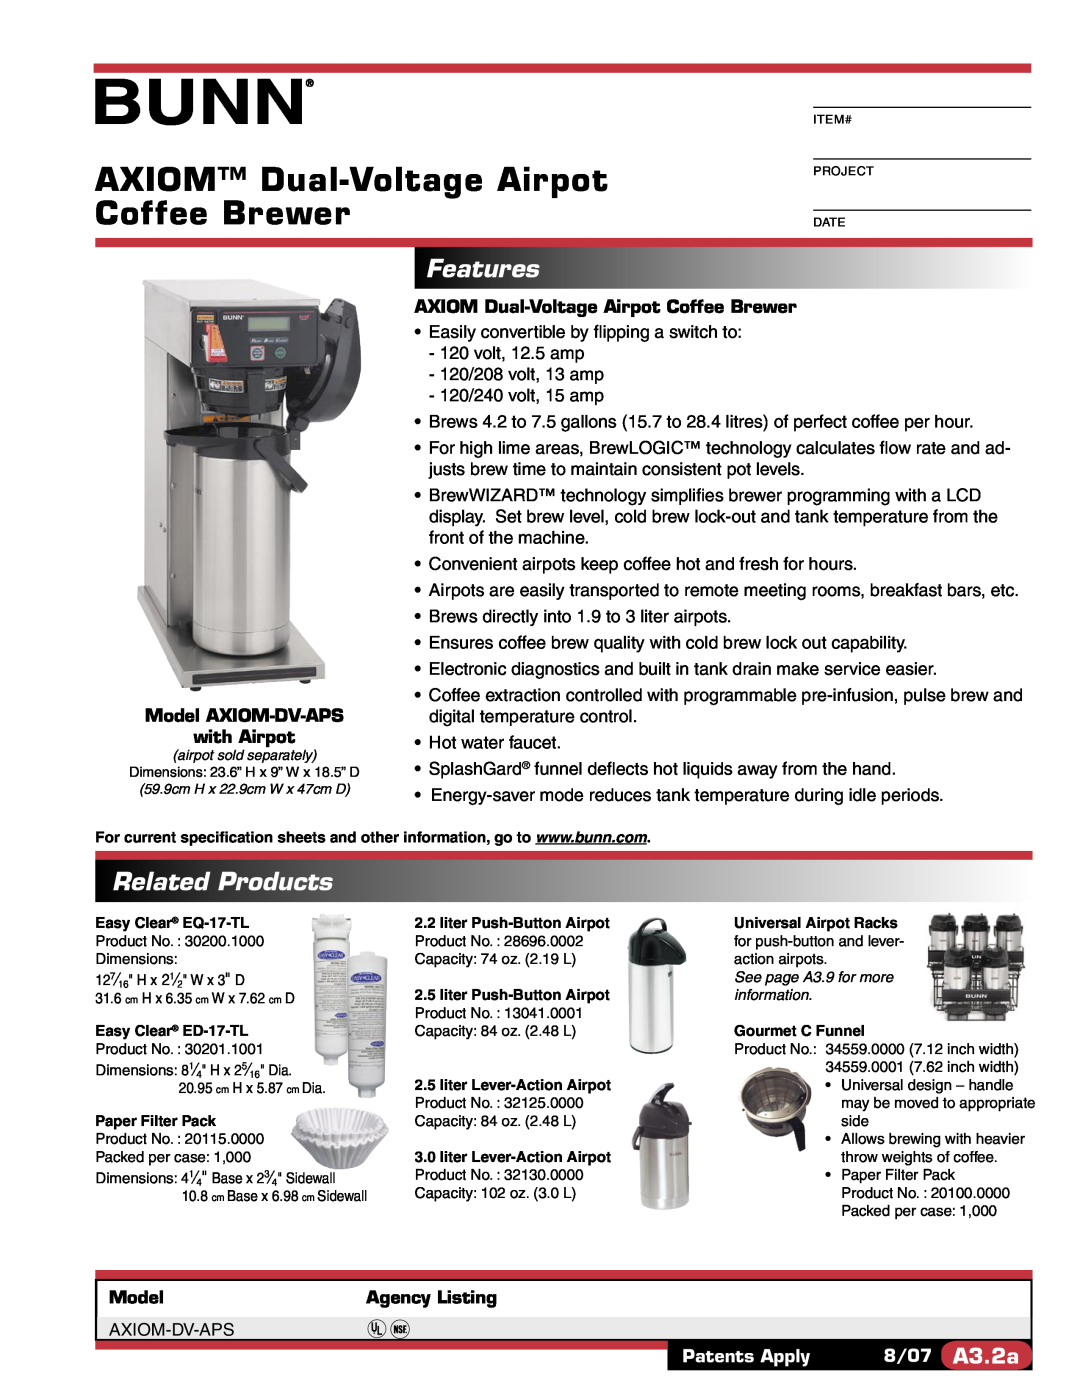 Bunn AXIOM-DV-APS specifications AXIOM Dual-VoltageAirpot Coffee Brewer, Features, Related Products, Model, Agency Listing 